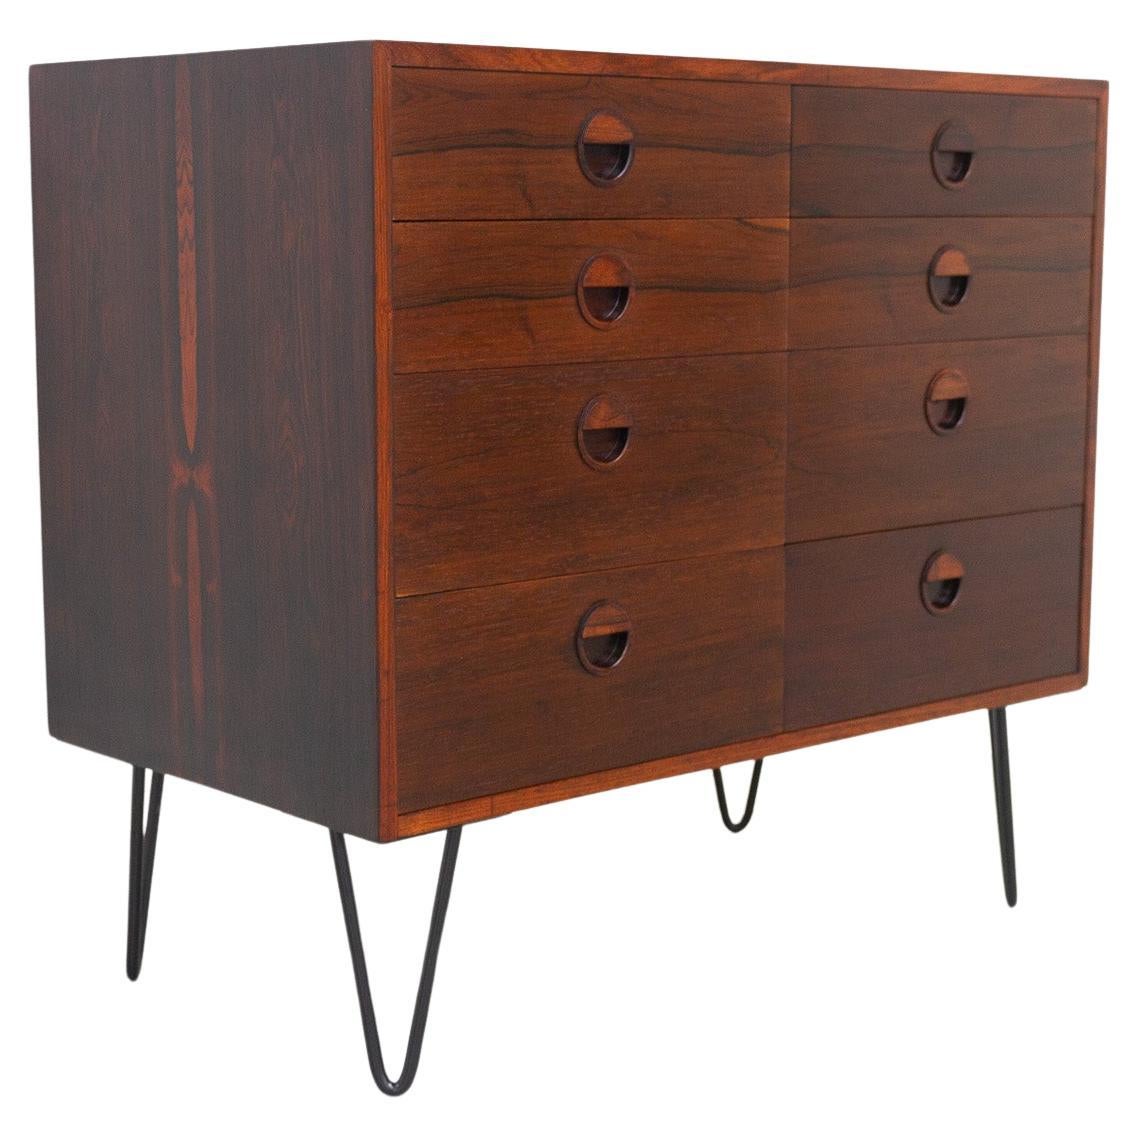 Vintage Danish Rosewood Chest of Drawers by Hg Furniture, 1960s